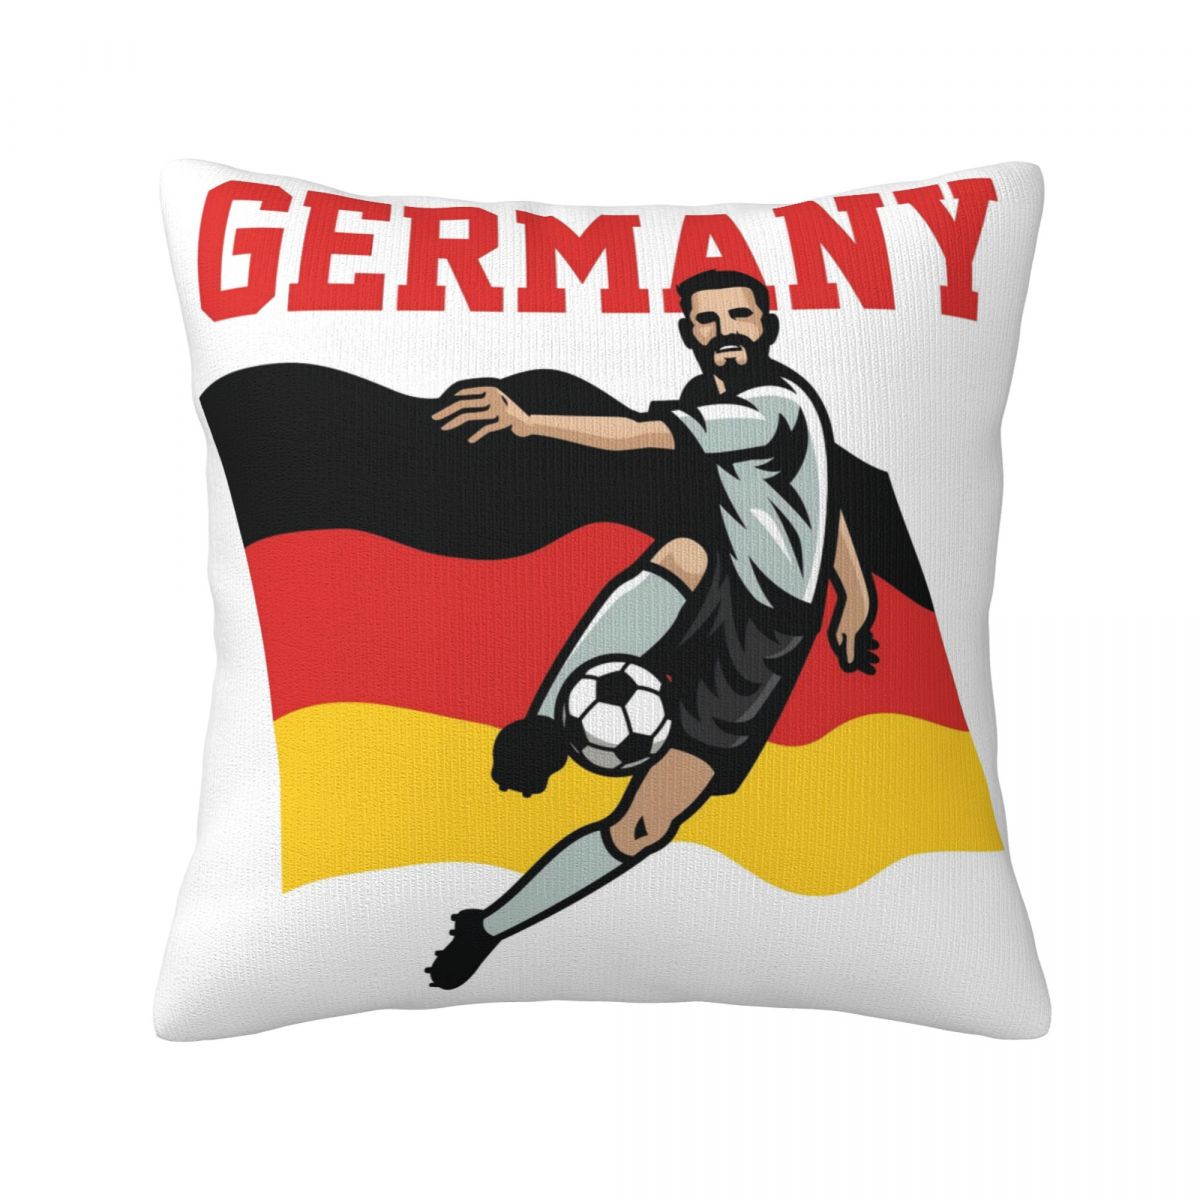 Germany Soccer Player Decorative Square Throw Pillow Covers